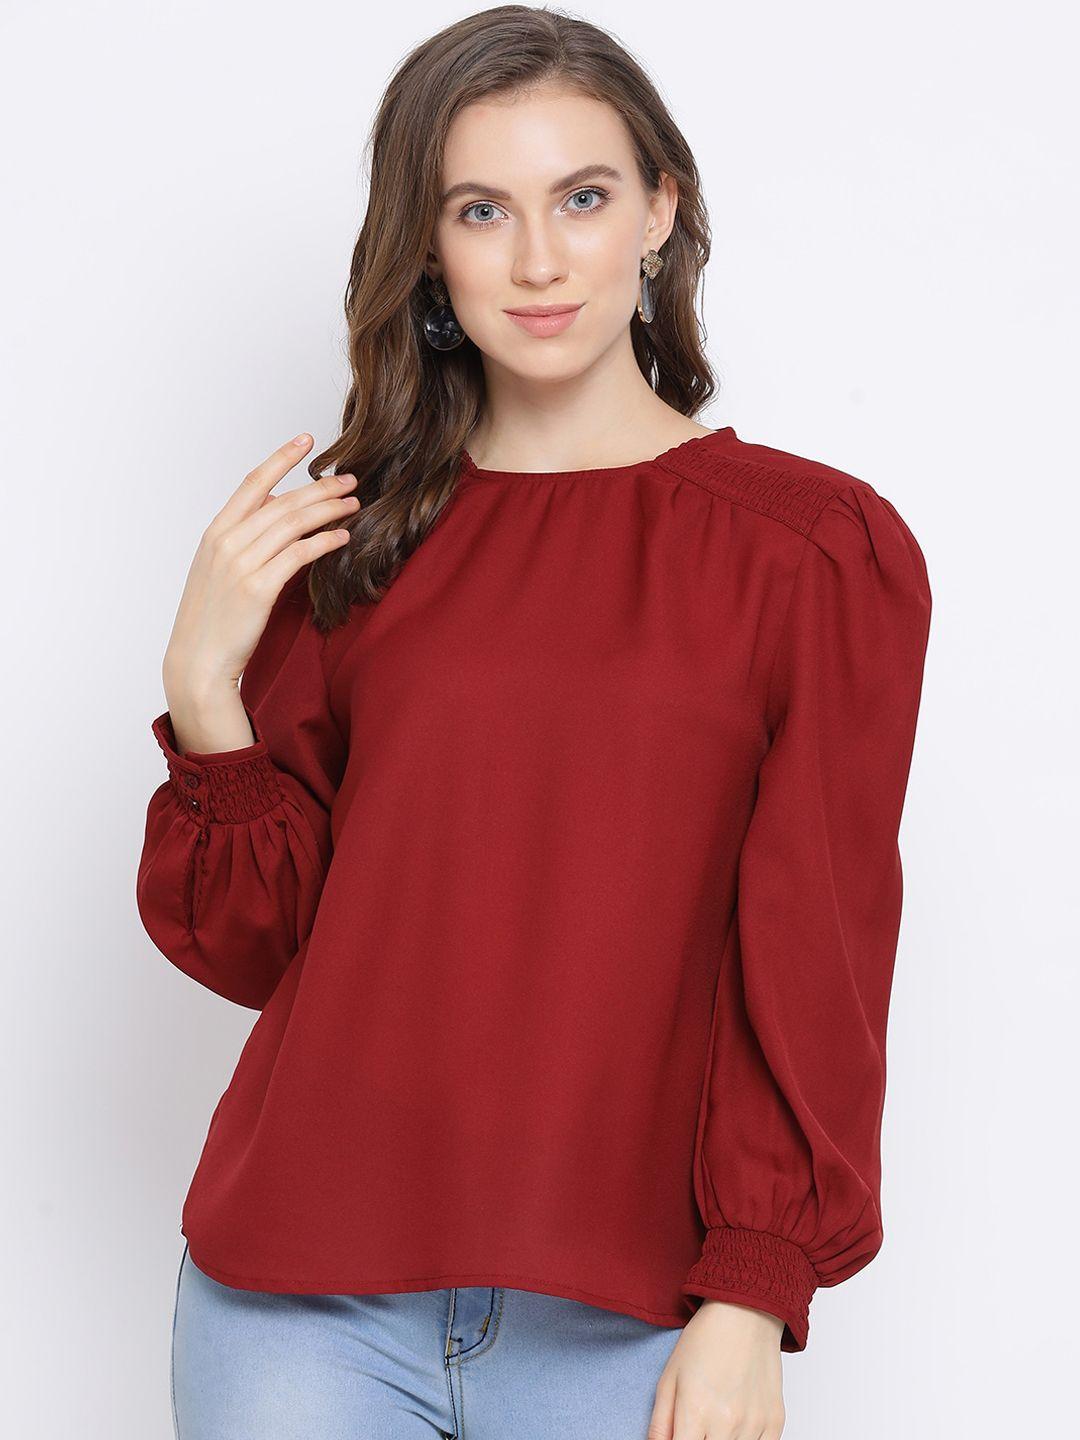 oxolloxo-women-red-solid-top